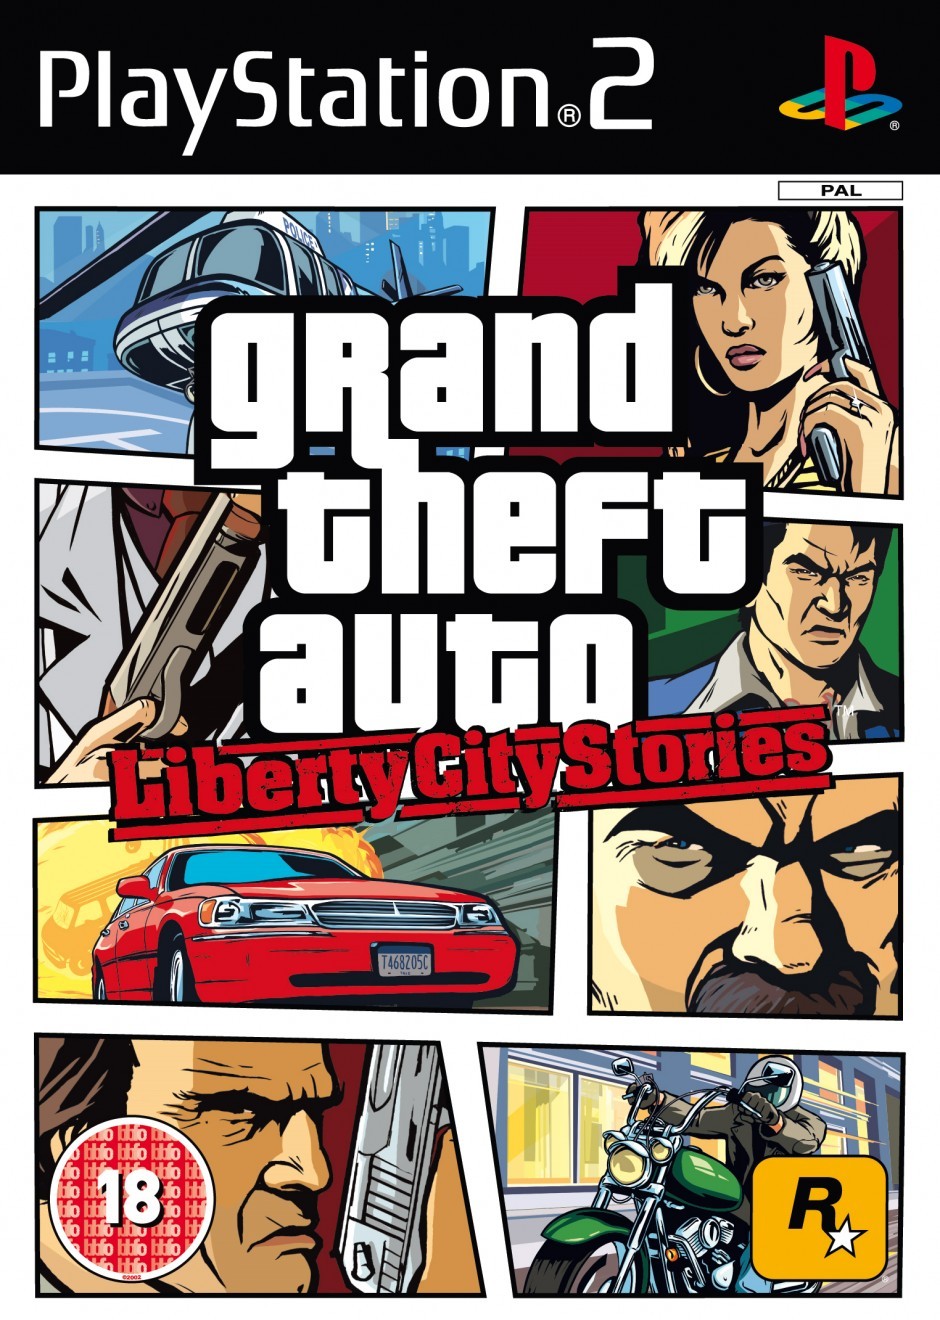 Grand Theft Auto Ps2 Iso Download